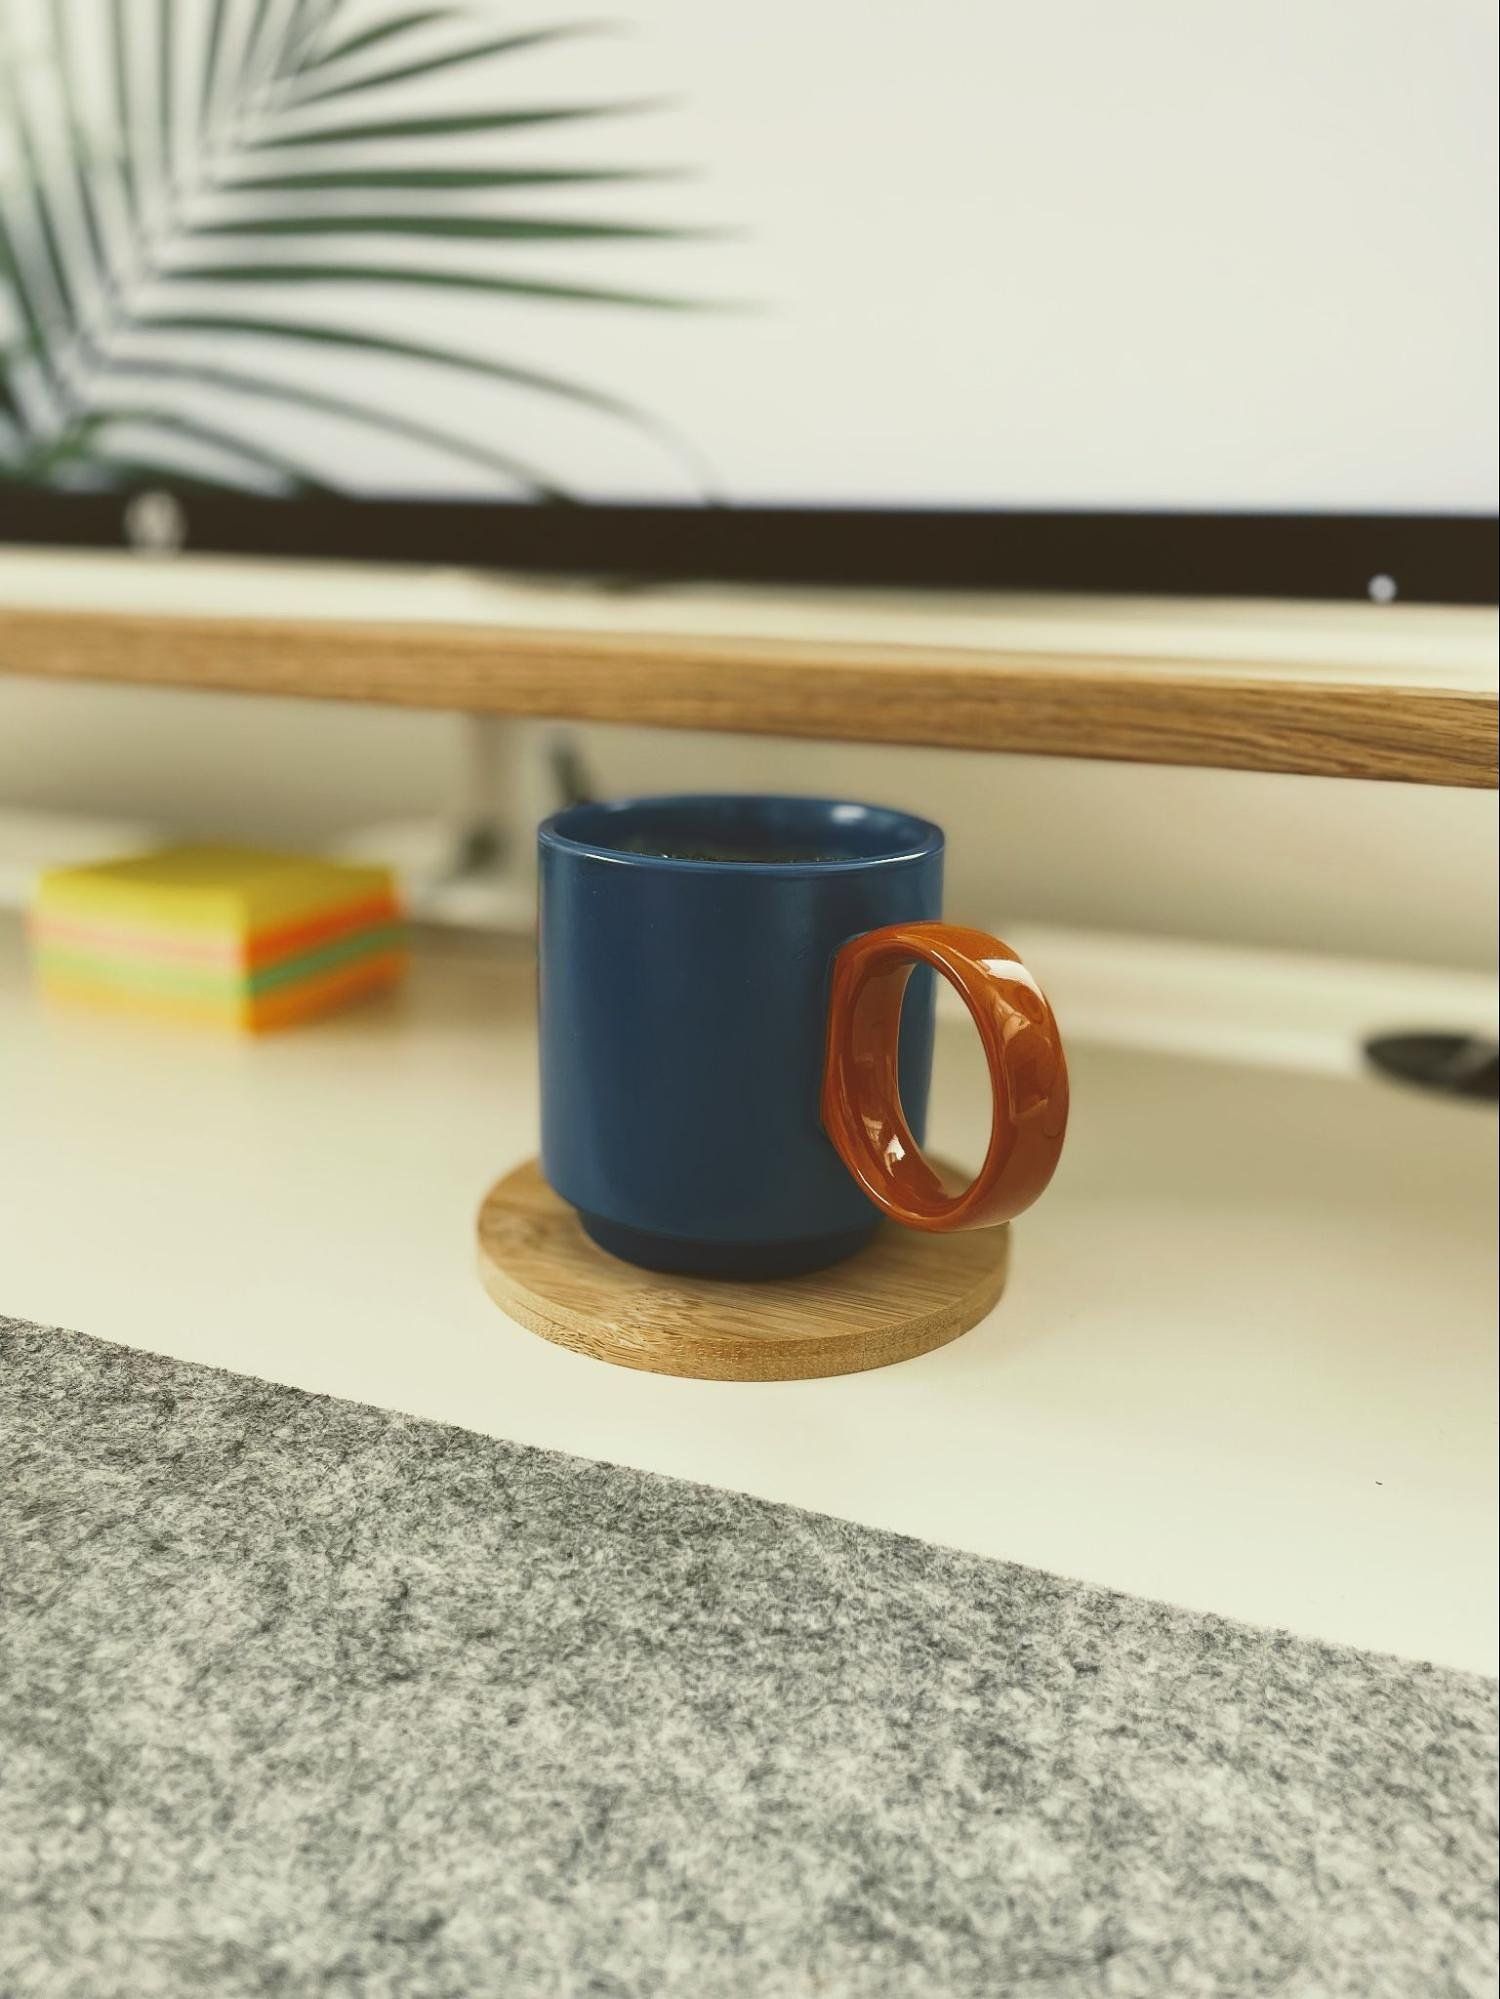 A cup of coffee sitting on a wooden coaster on a desk